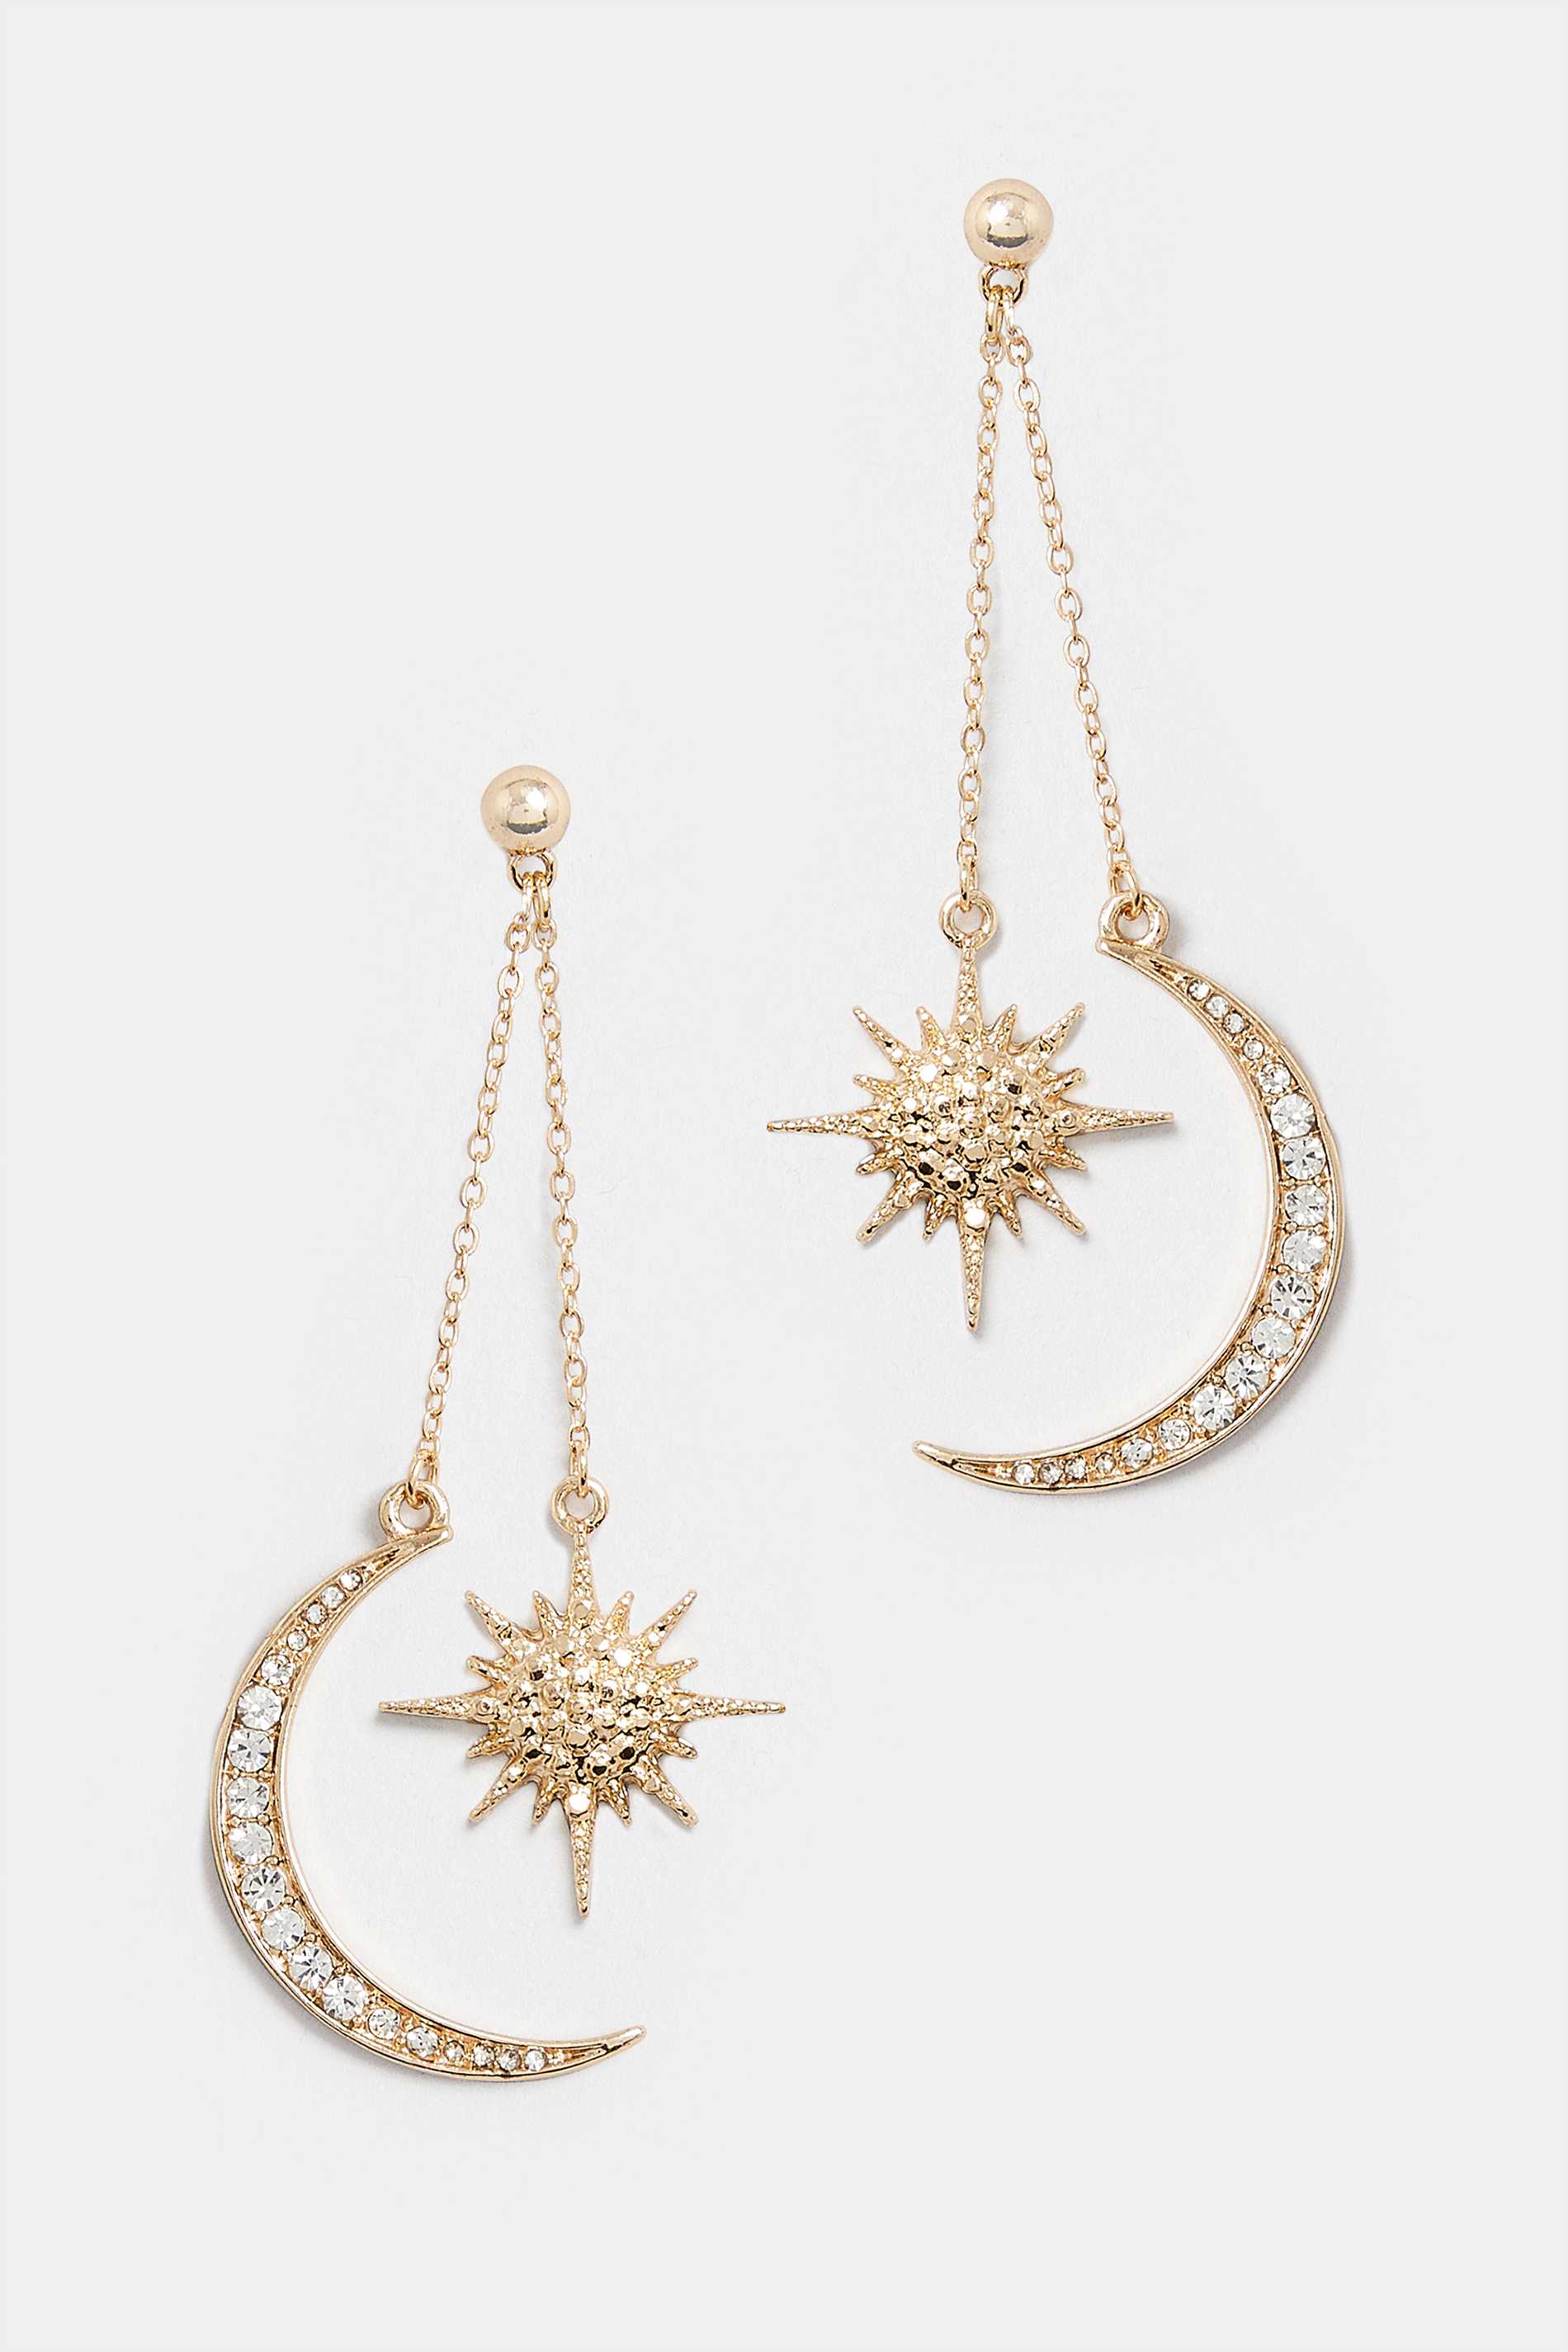 Gold Tone Celestial Statement Earrings | Yours Clothing 2